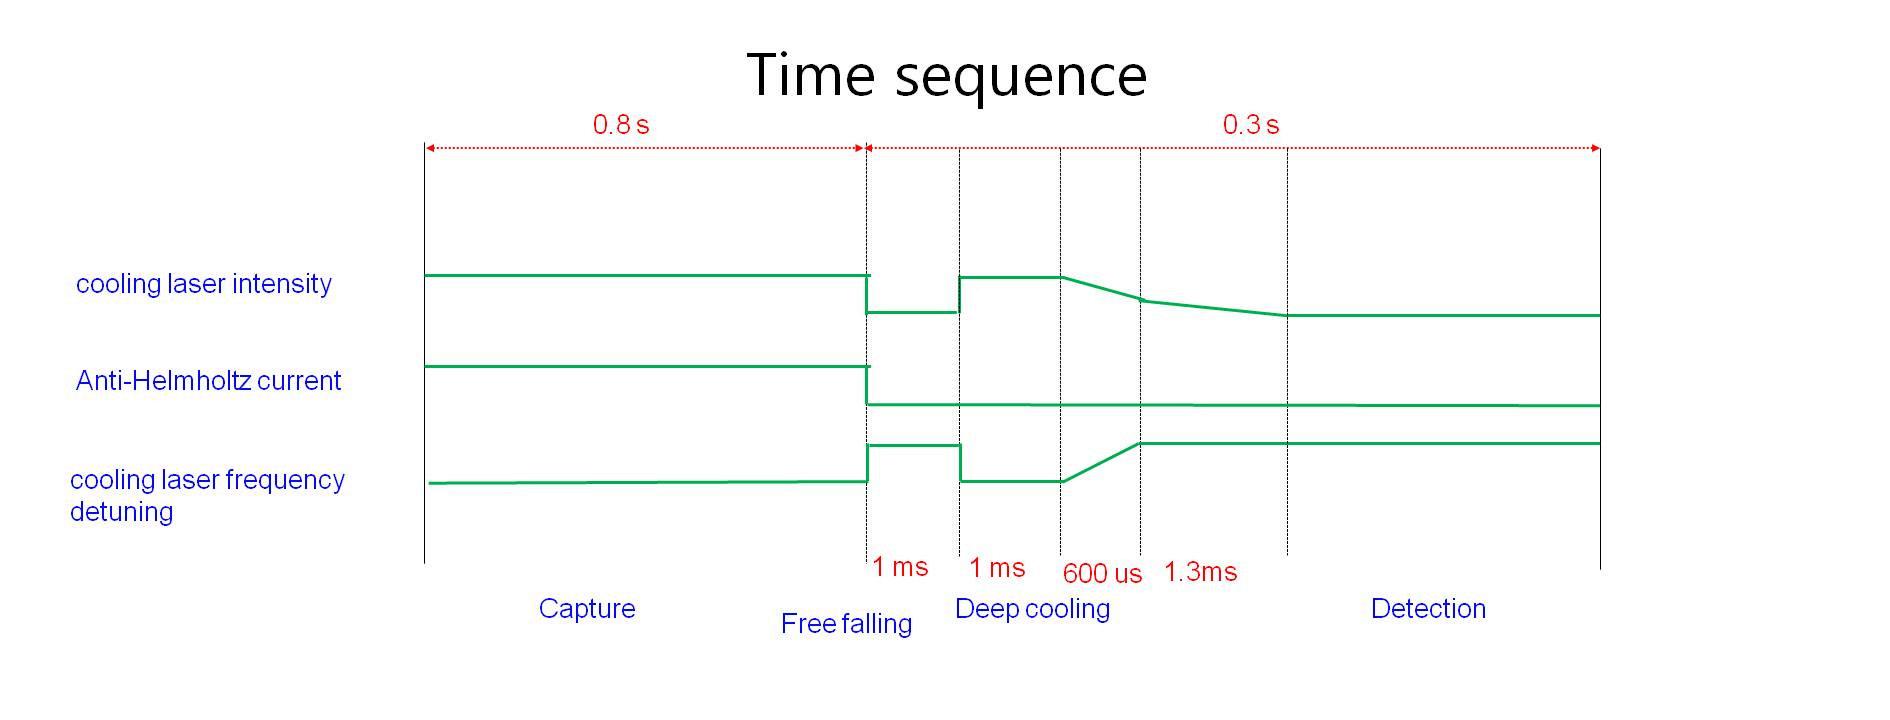 Tim sequency for a deep cooling and a free falling of trapped atoms.